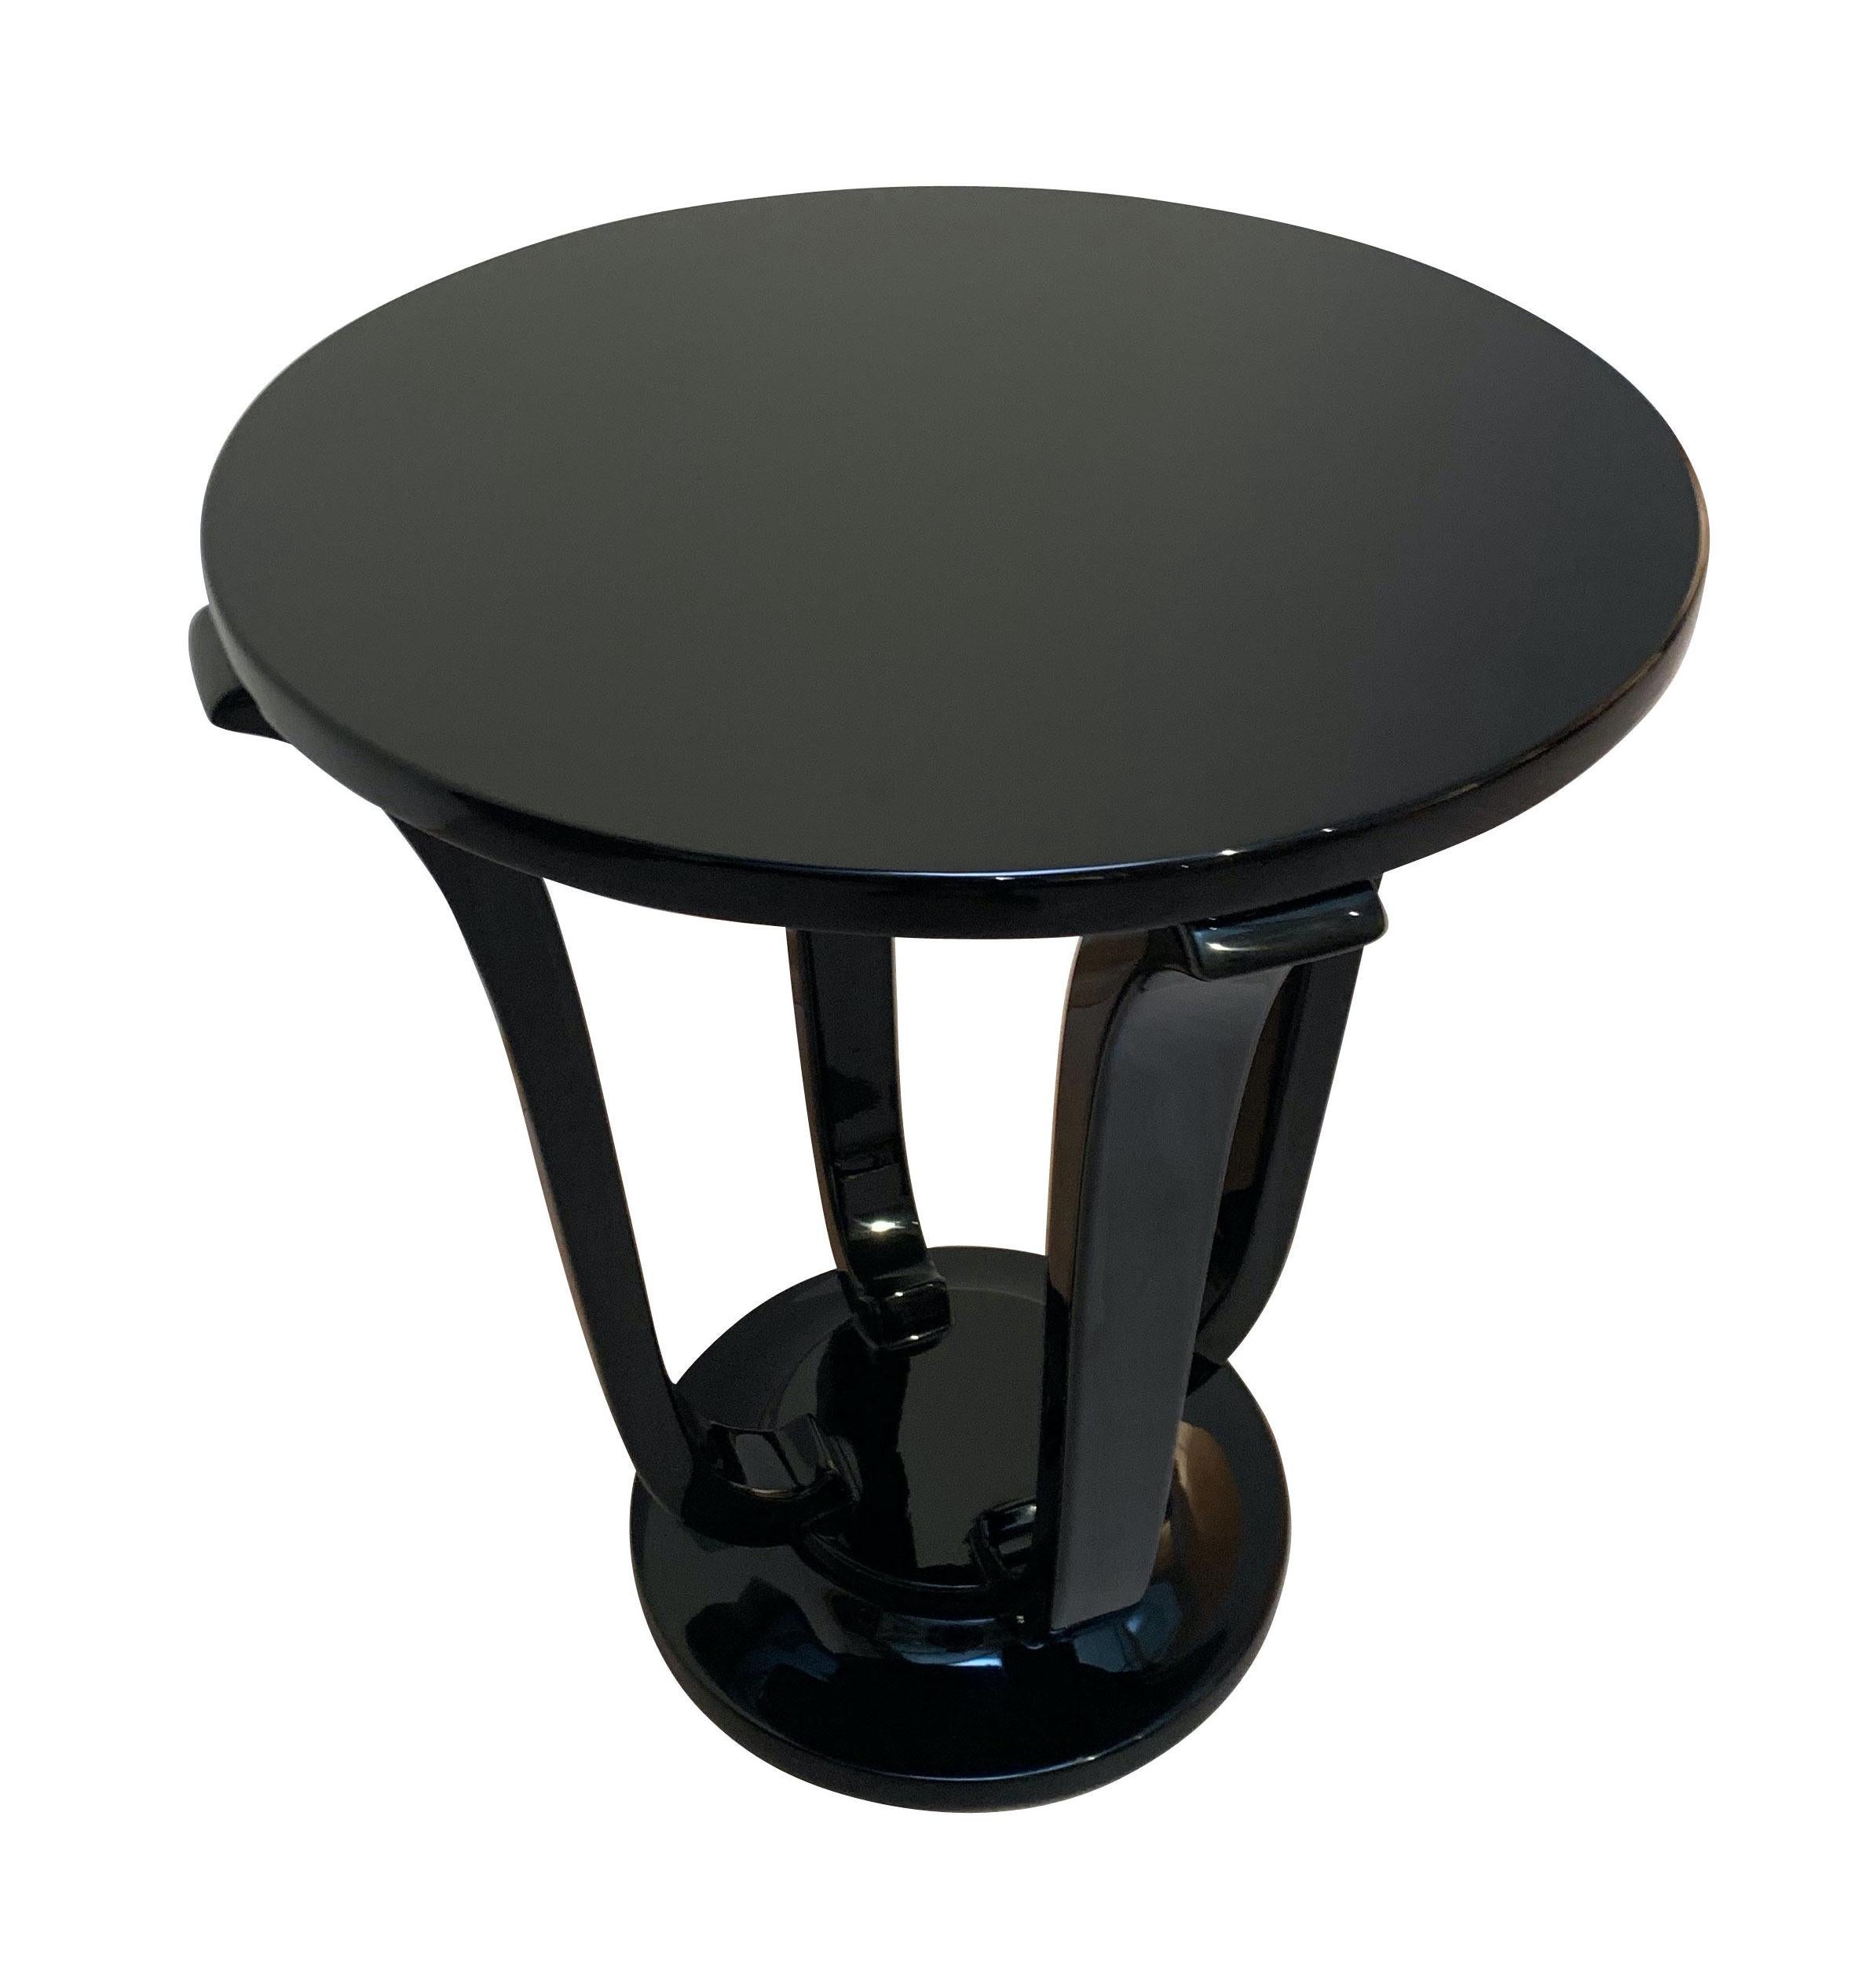 Four-legged French Art Deco style guéridon or side table
Beech solid wood, lacquered with black piano lacquer and high-gloss polished.
Art Deco style after original design, built in Germany.